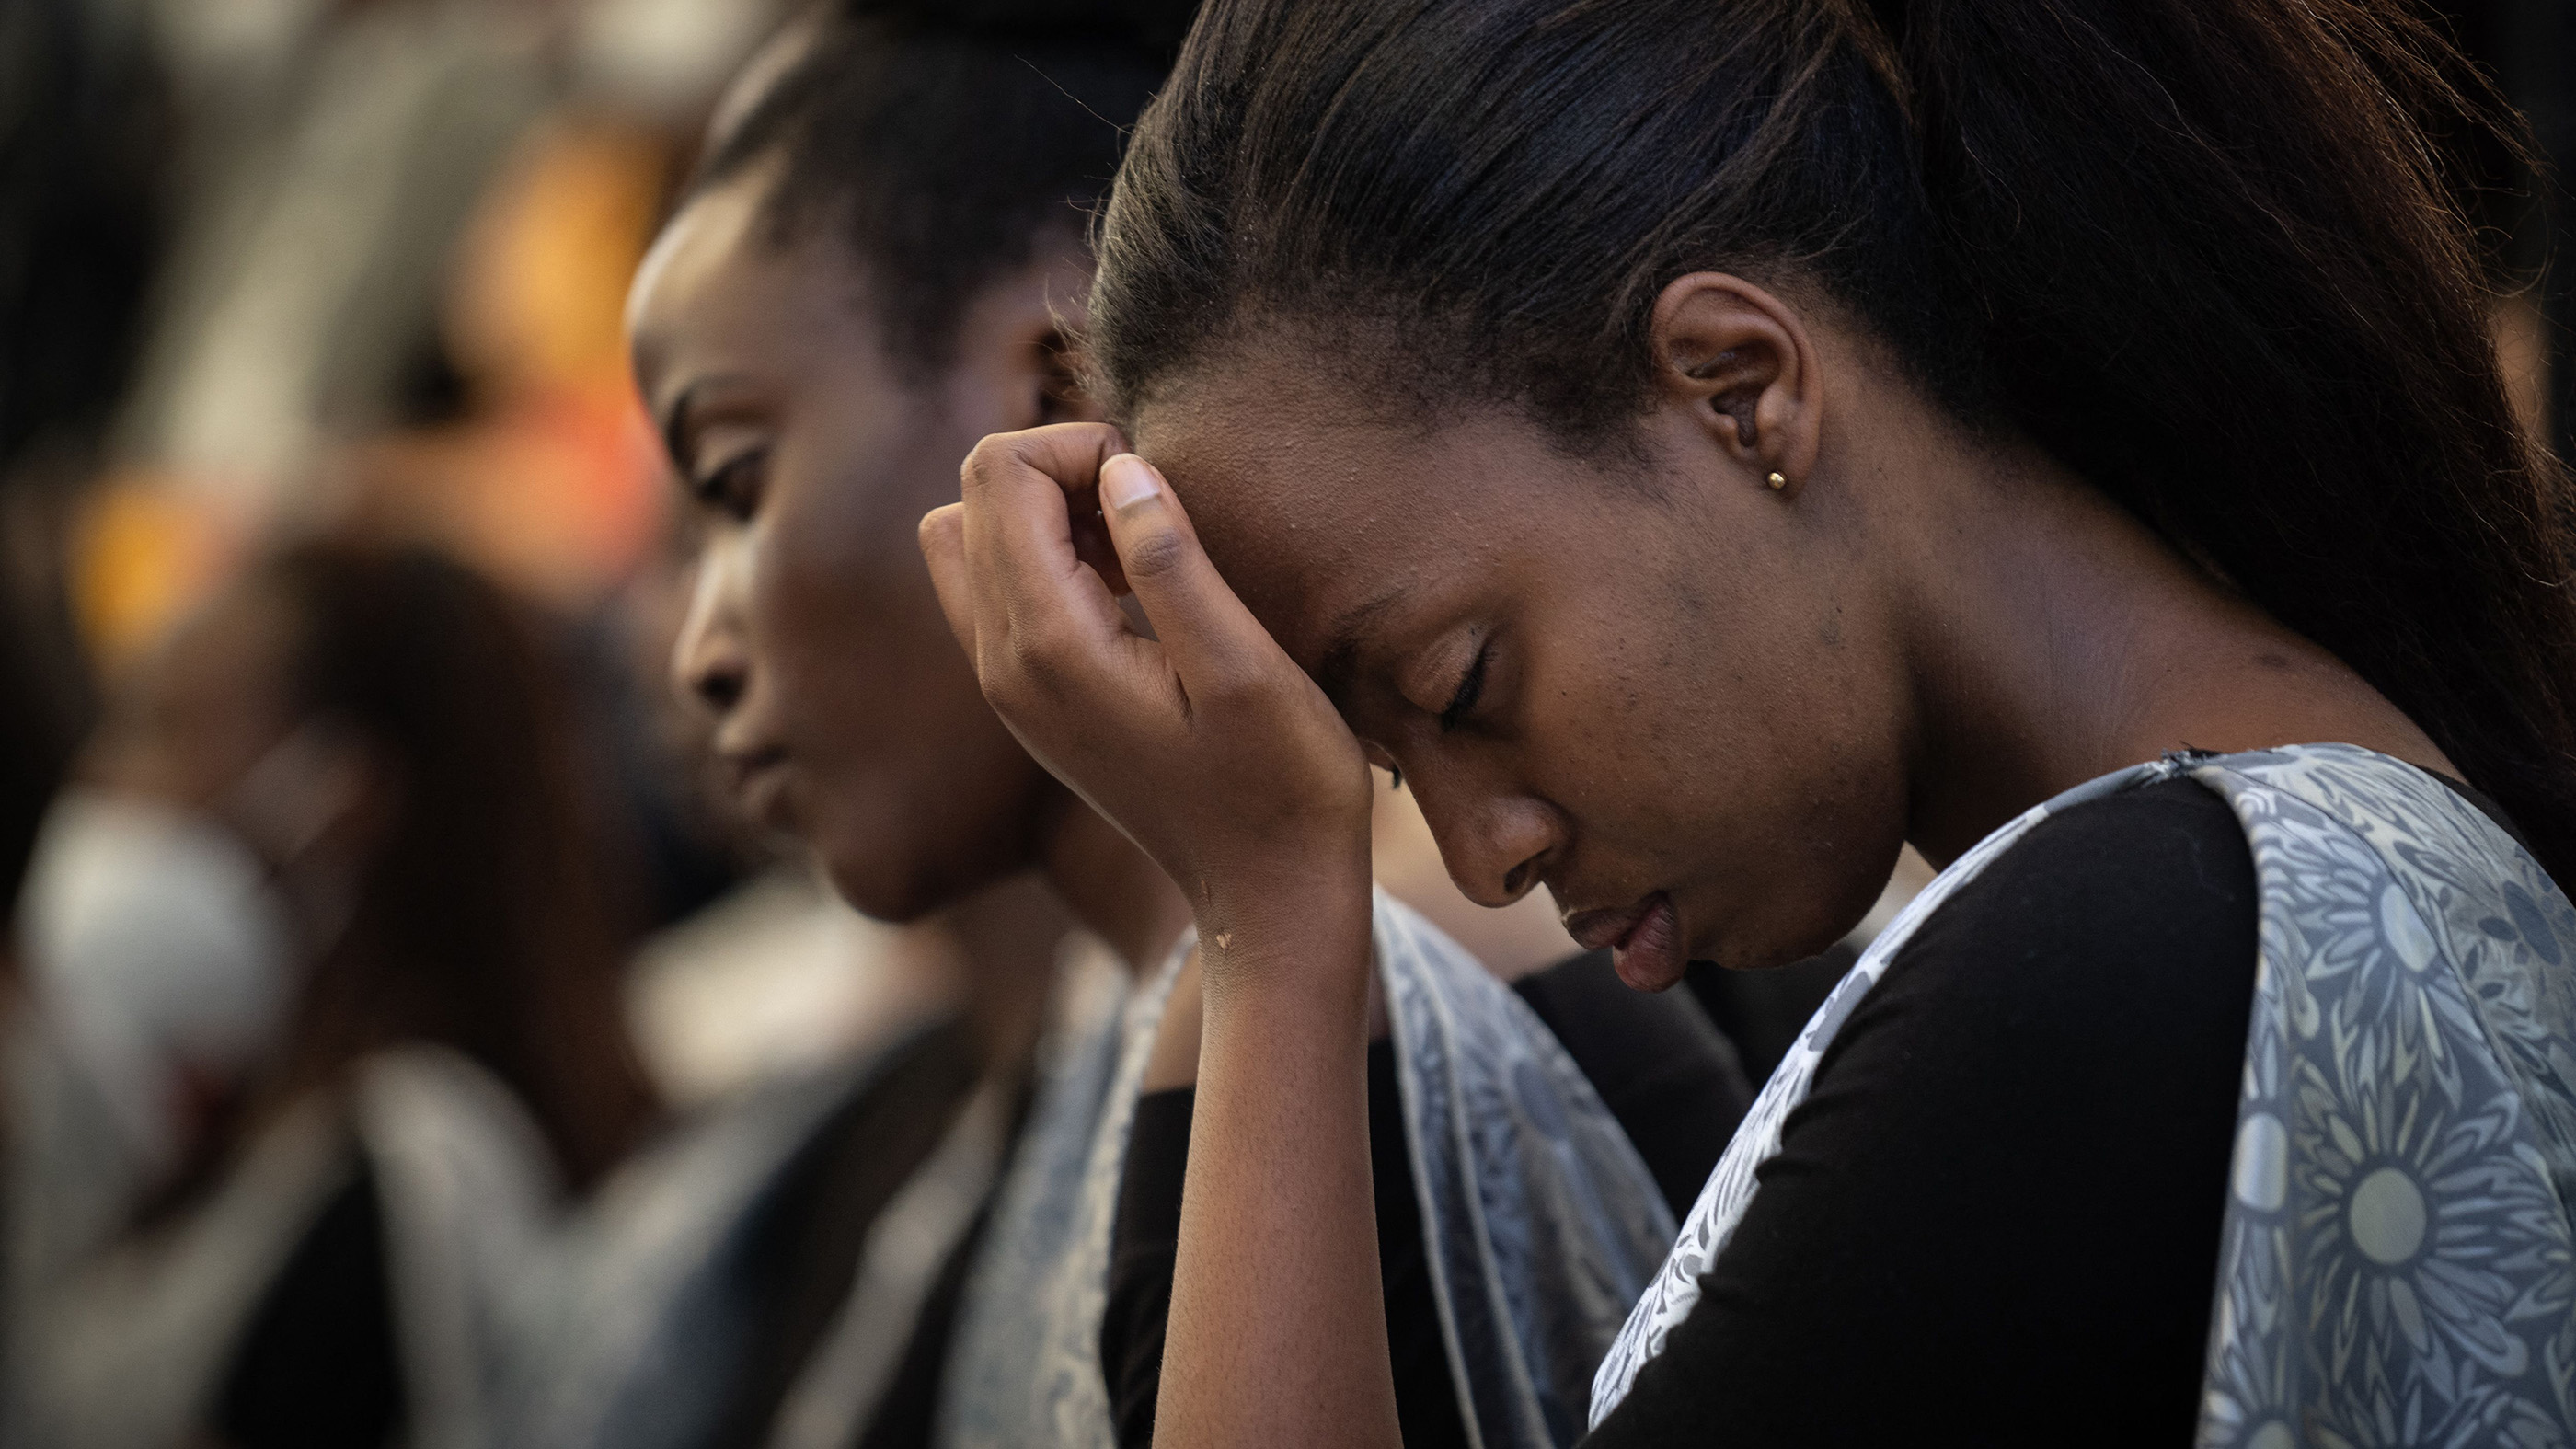 An attendee reacts during the ceremony at Gisozi Genocide Memorial, Kigali, Rwanda on April 7, 2022. The memorial is in commemoration of the 1994 genocide, in which 800,000 mostly Tutsis, but also moderate Hutus, were slaughtered.